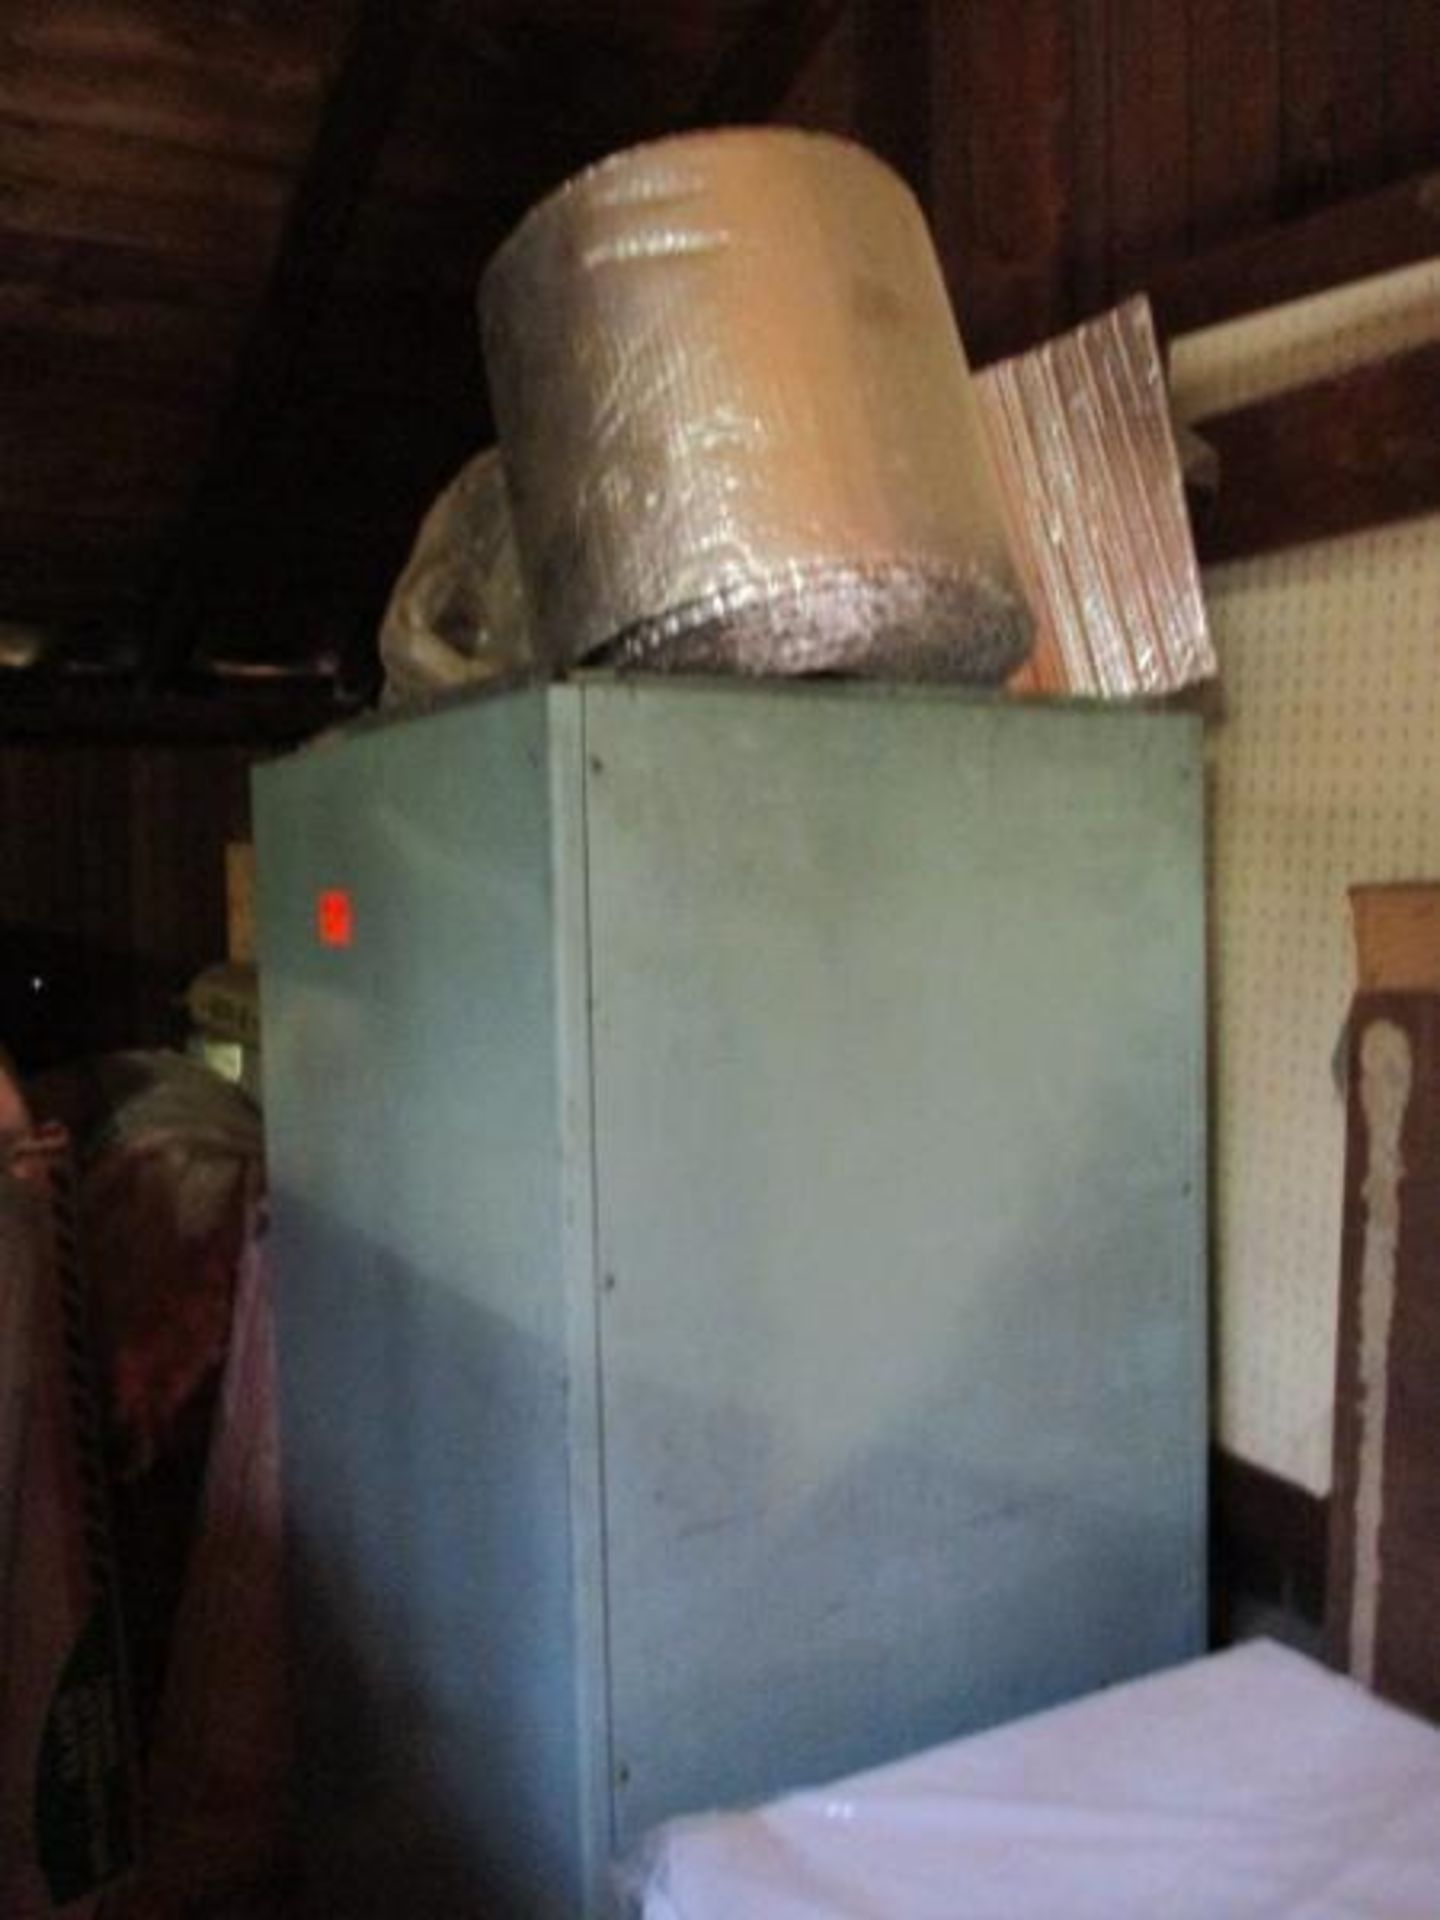 Williamson Temp-O-Matic Hot Air Furnace, Oil Fired w/ Contents on Top